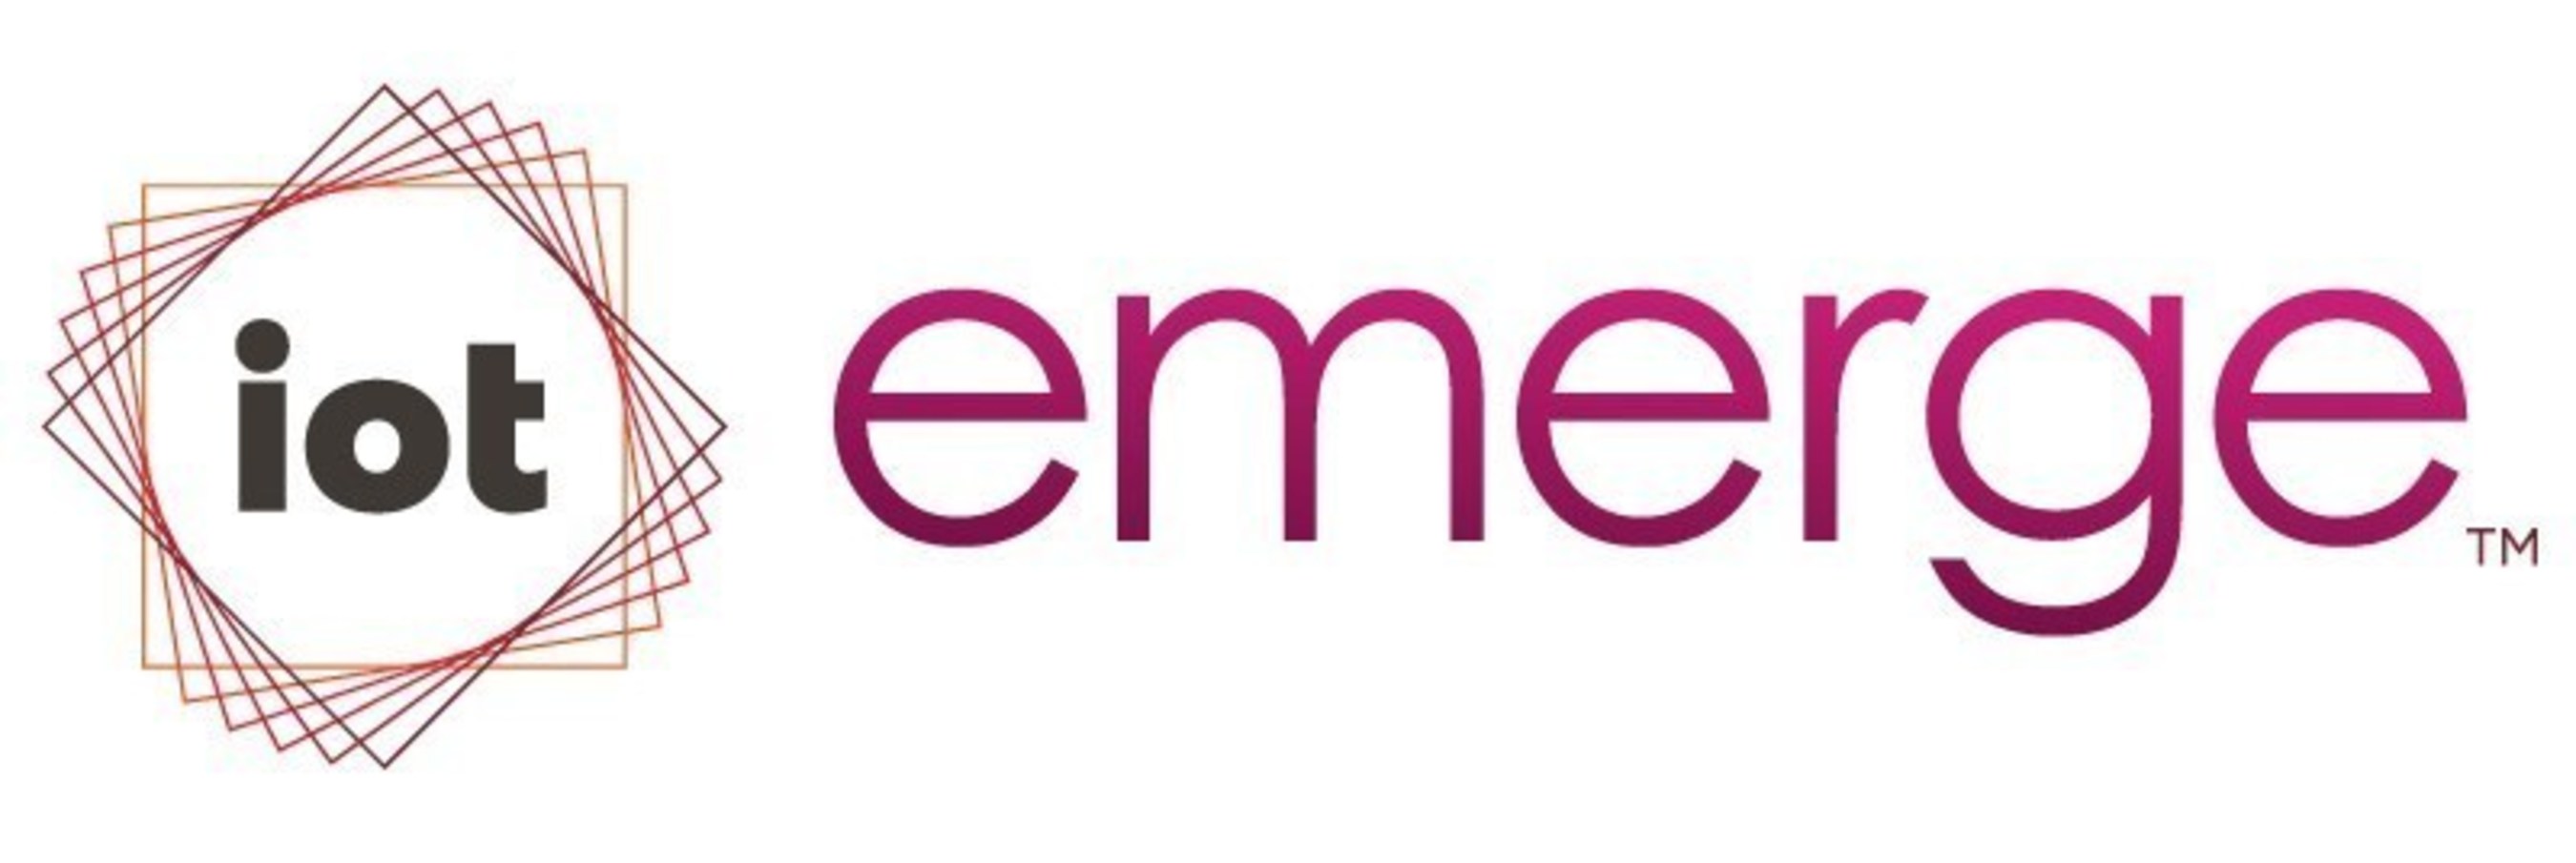 Penton's IoT Emerge Chicago Event Site Tour Lunch & Learns Will Offer Insights on Tech Challenges, Opportunities & Solutions